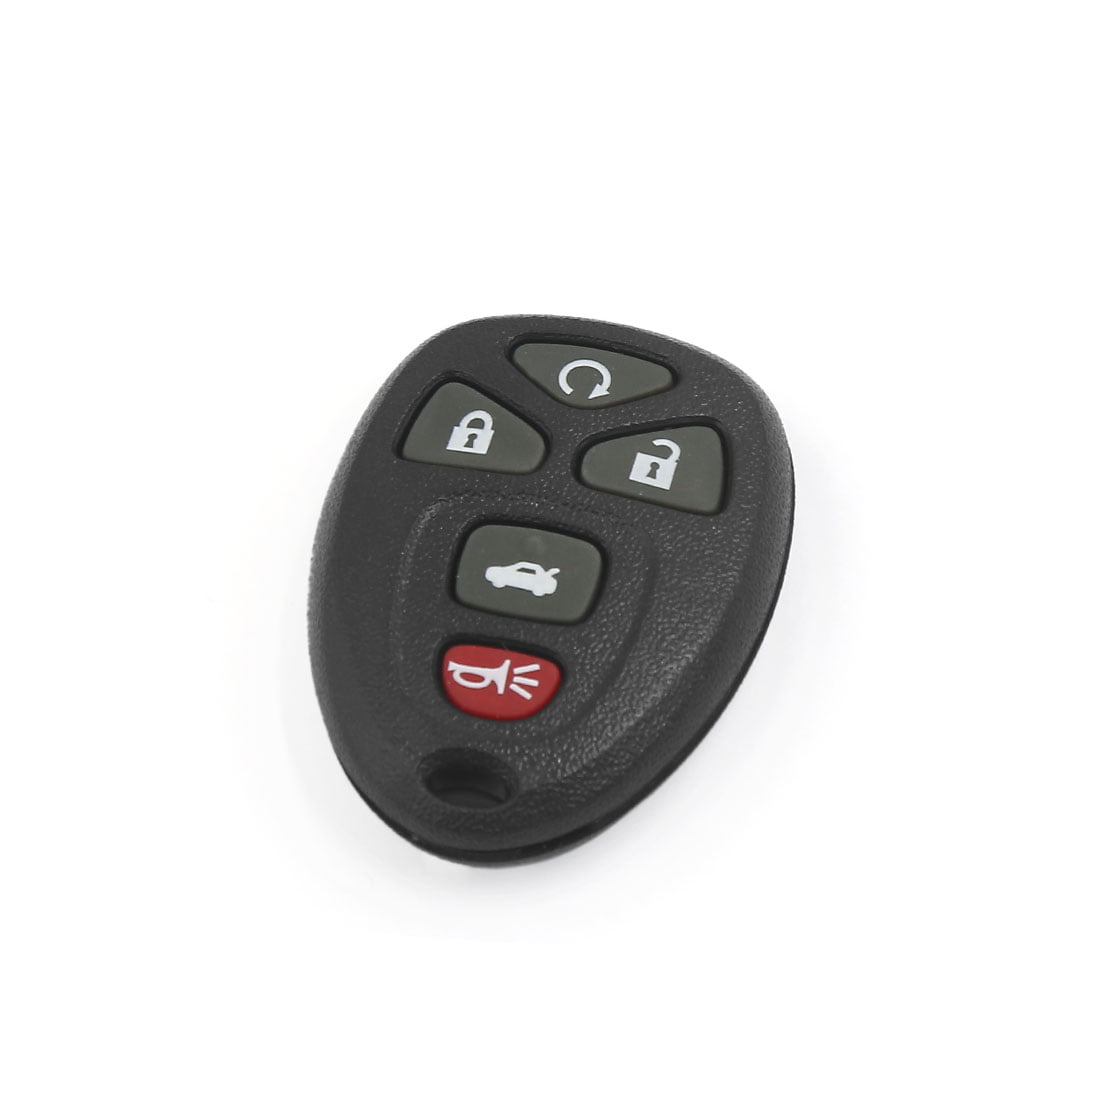 New Replacement Keyless Entry Remote Start Key Fob Clicker for 15912860 Key